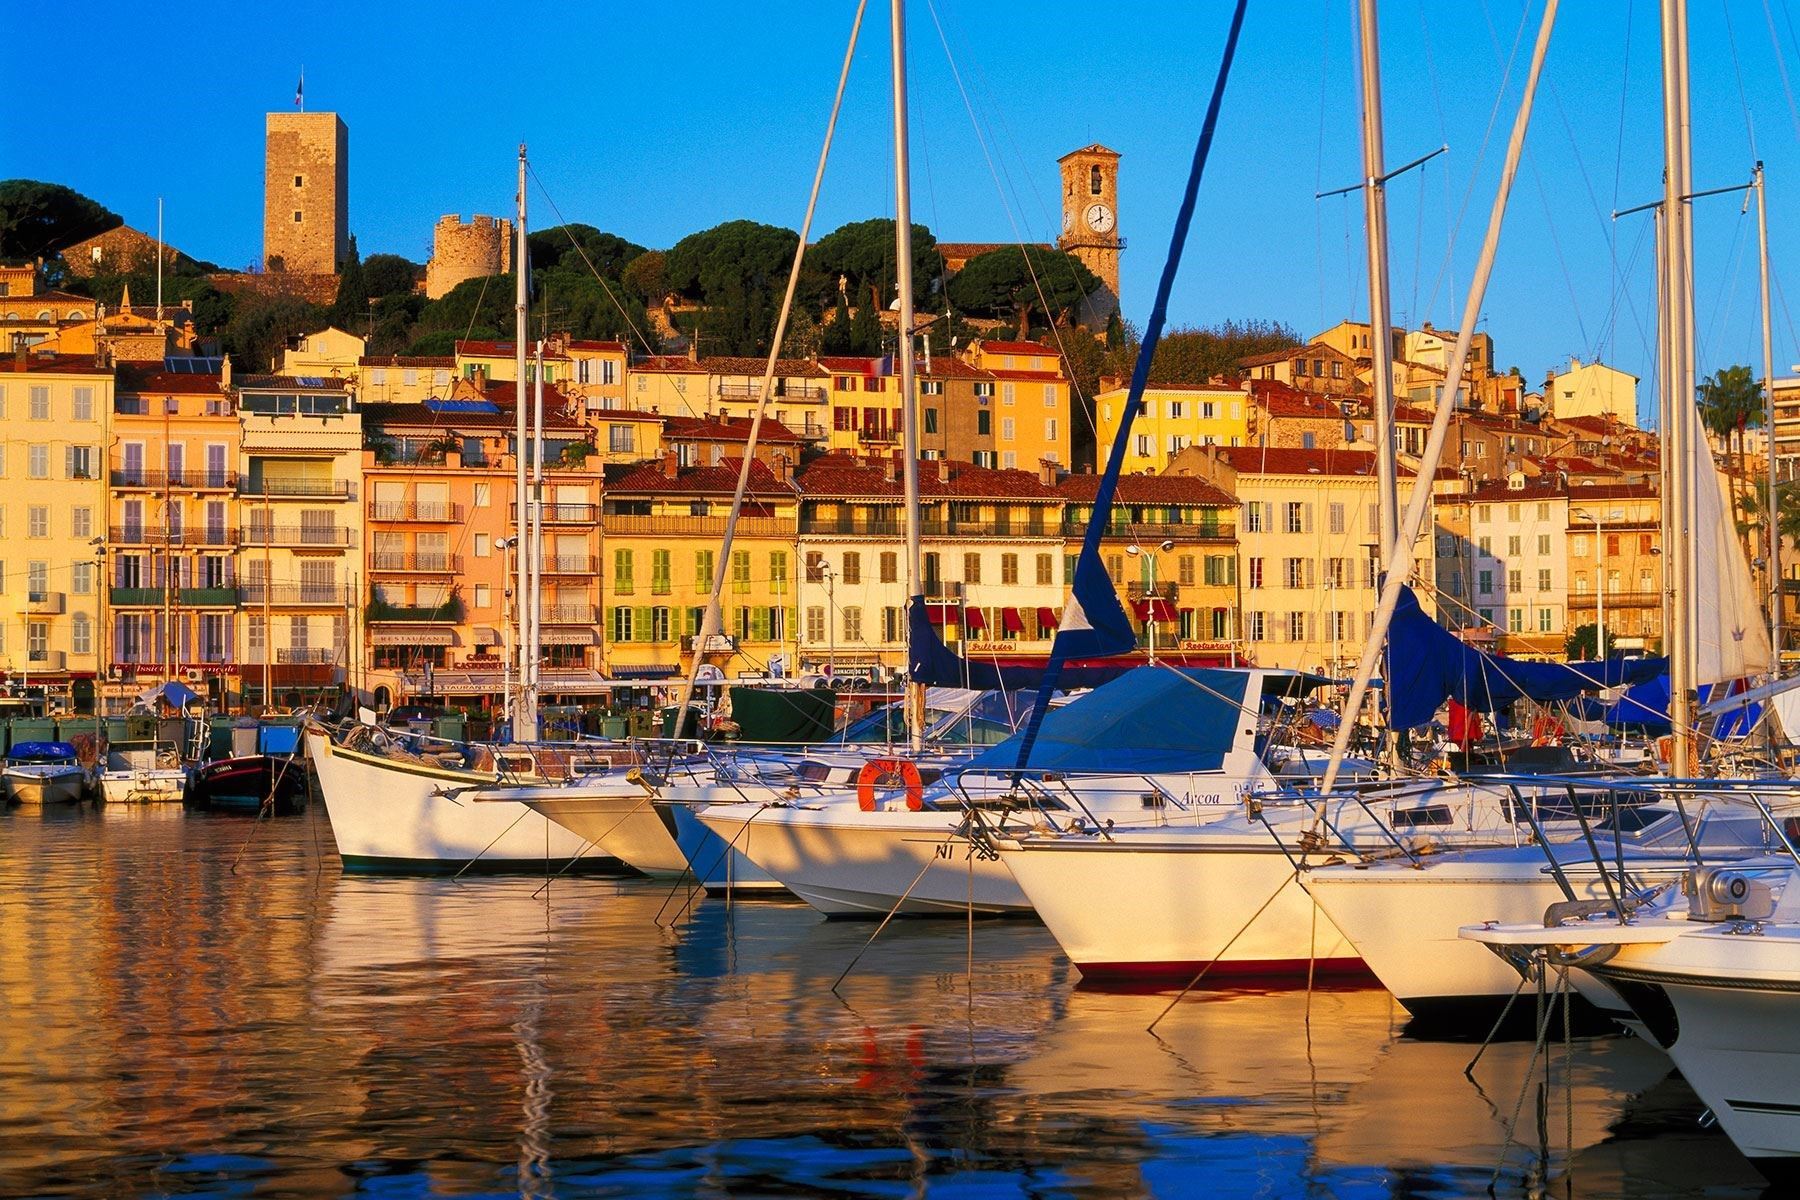 It seems that US visitors aren't so taken with the Riviera's glitzy ways, with Cannes and Monte Carlo both appearing in the top ten. Readers described Cannes as "very forgettable" and "uninspiring" with "disappointing and unfriendly" locals.